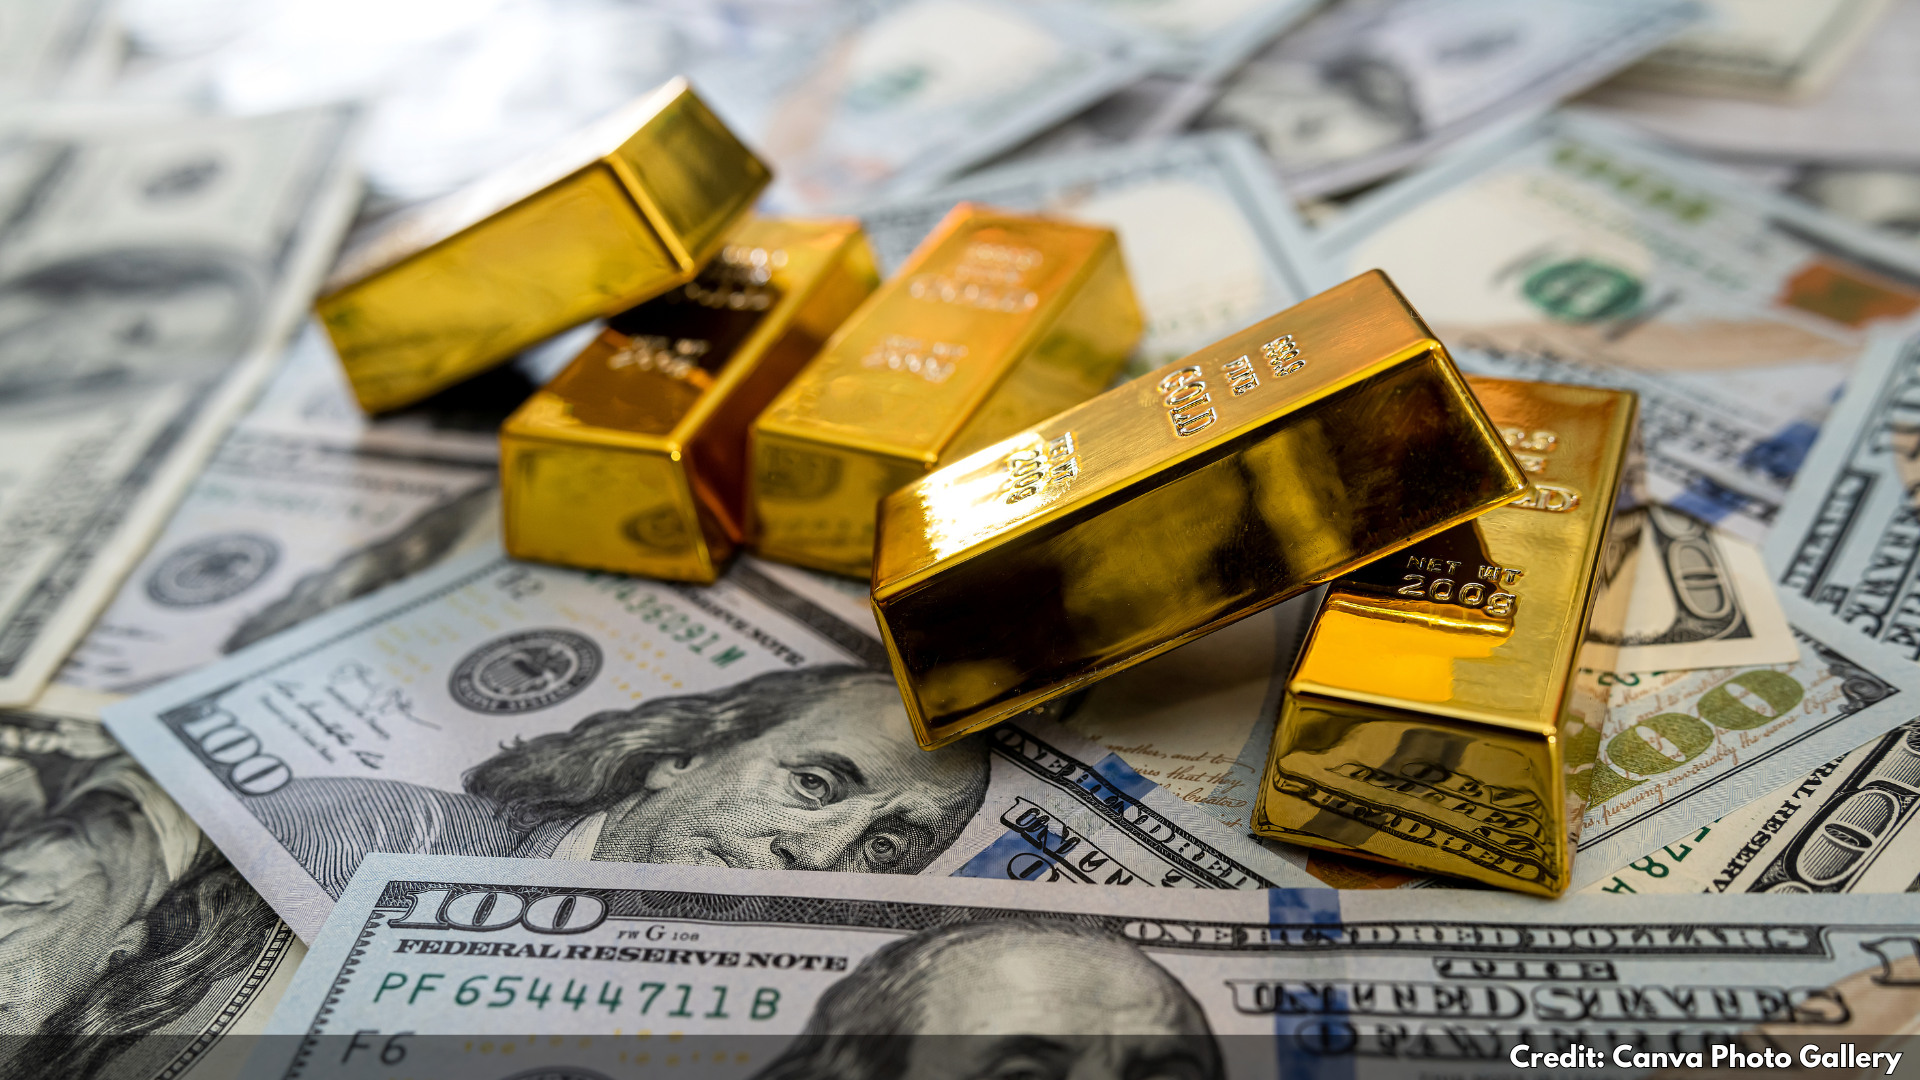 Gold hits high of USD 2,483 High as Fed Rate Cut Expectations and Geopolitical Tensions Fuel Rally